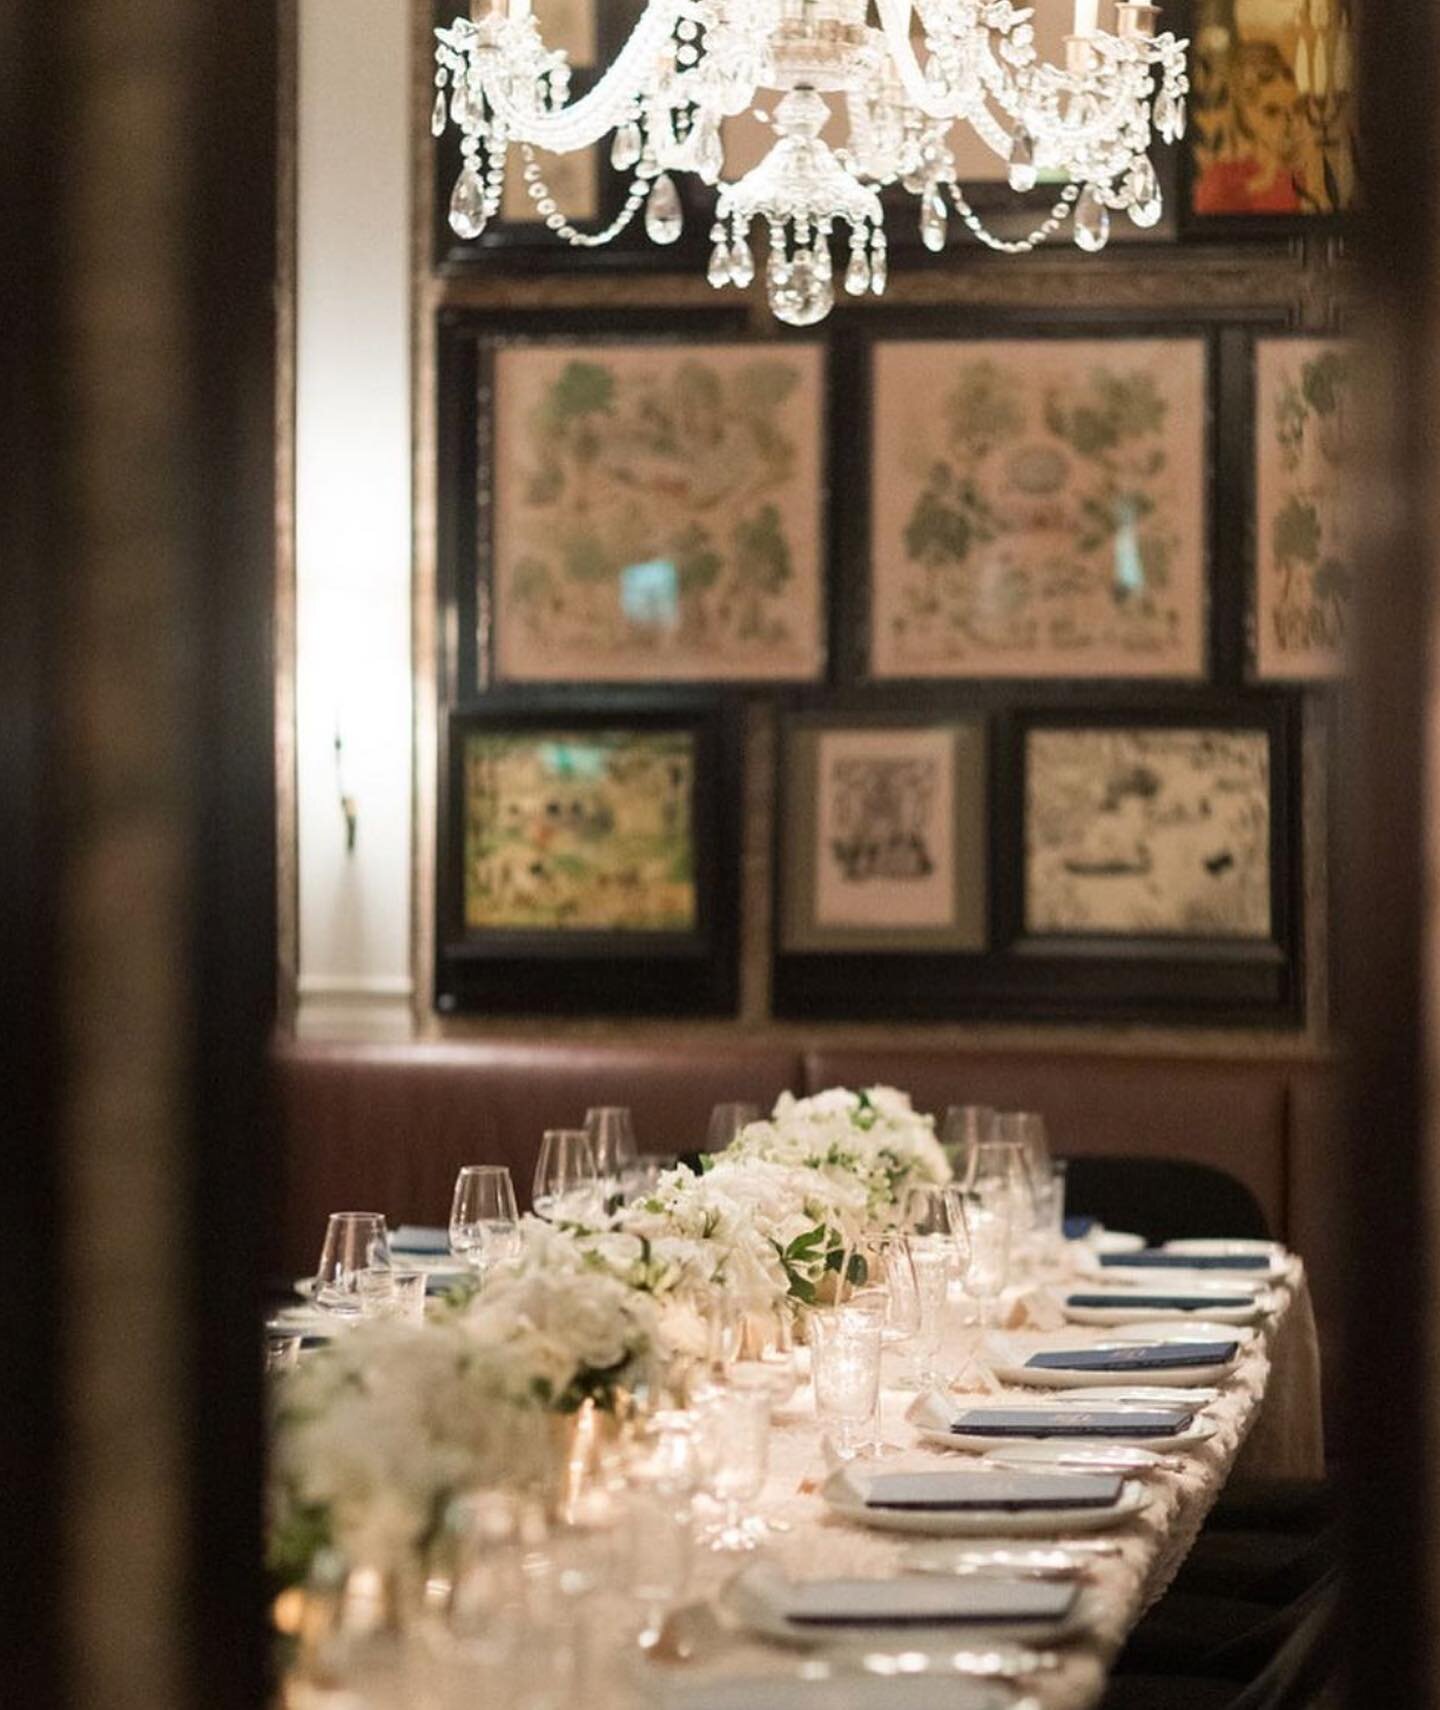 The perfect dinner 🥂 Intimate, elegant, and unforgettable.

Event Planning &amp; Design: @stateoftheartny
Photographer: @walker.studios
D&eacute;cor: @bellefleurny
Venue: @rosewoodthecarlyle